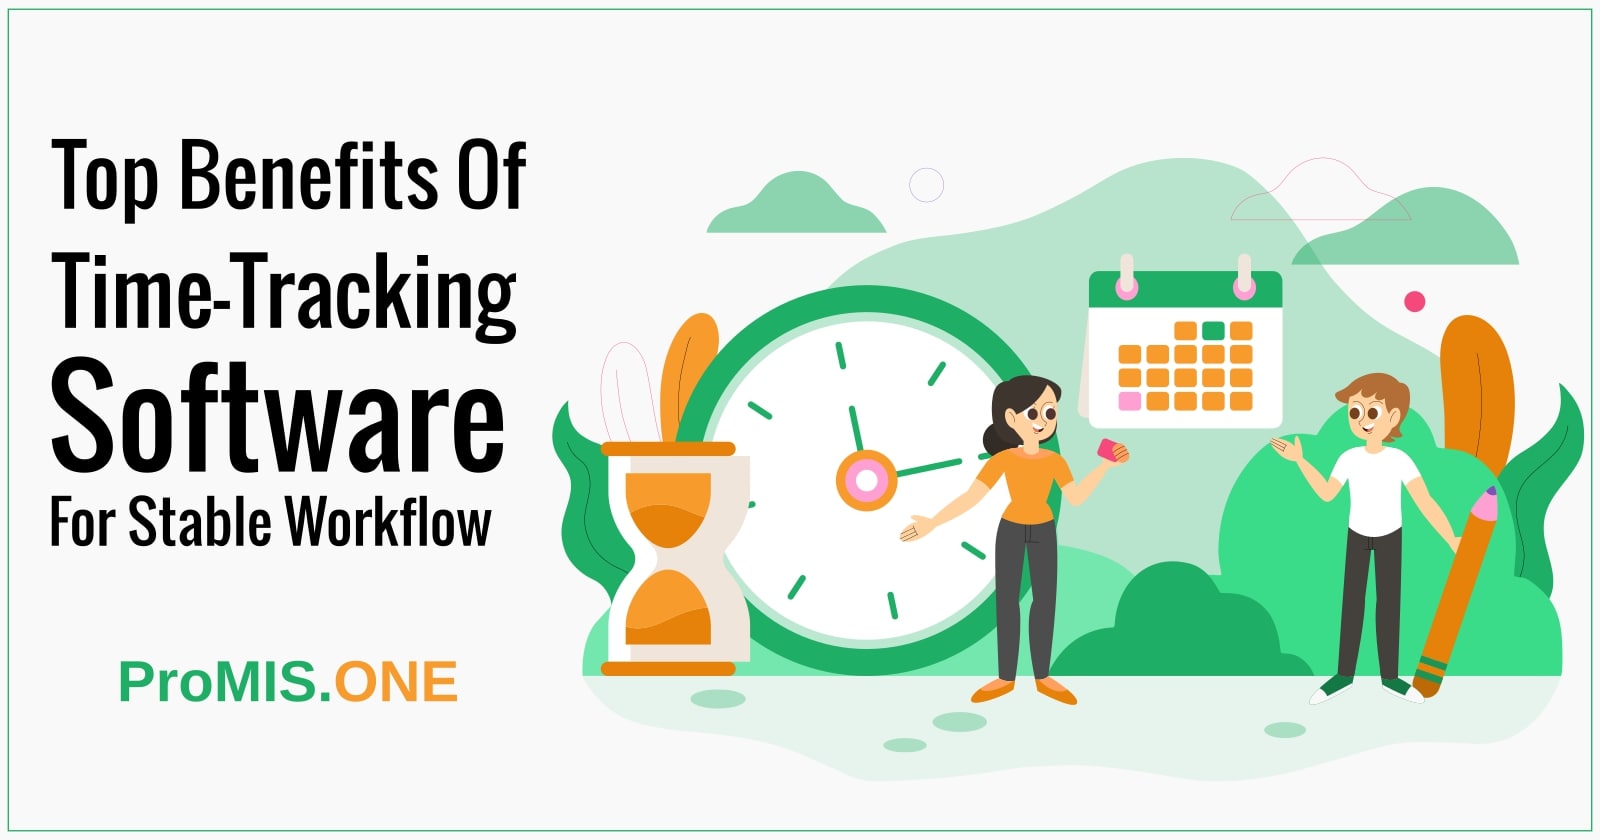 Top Benefits Of Time-Tracking Software For Stable Workflow